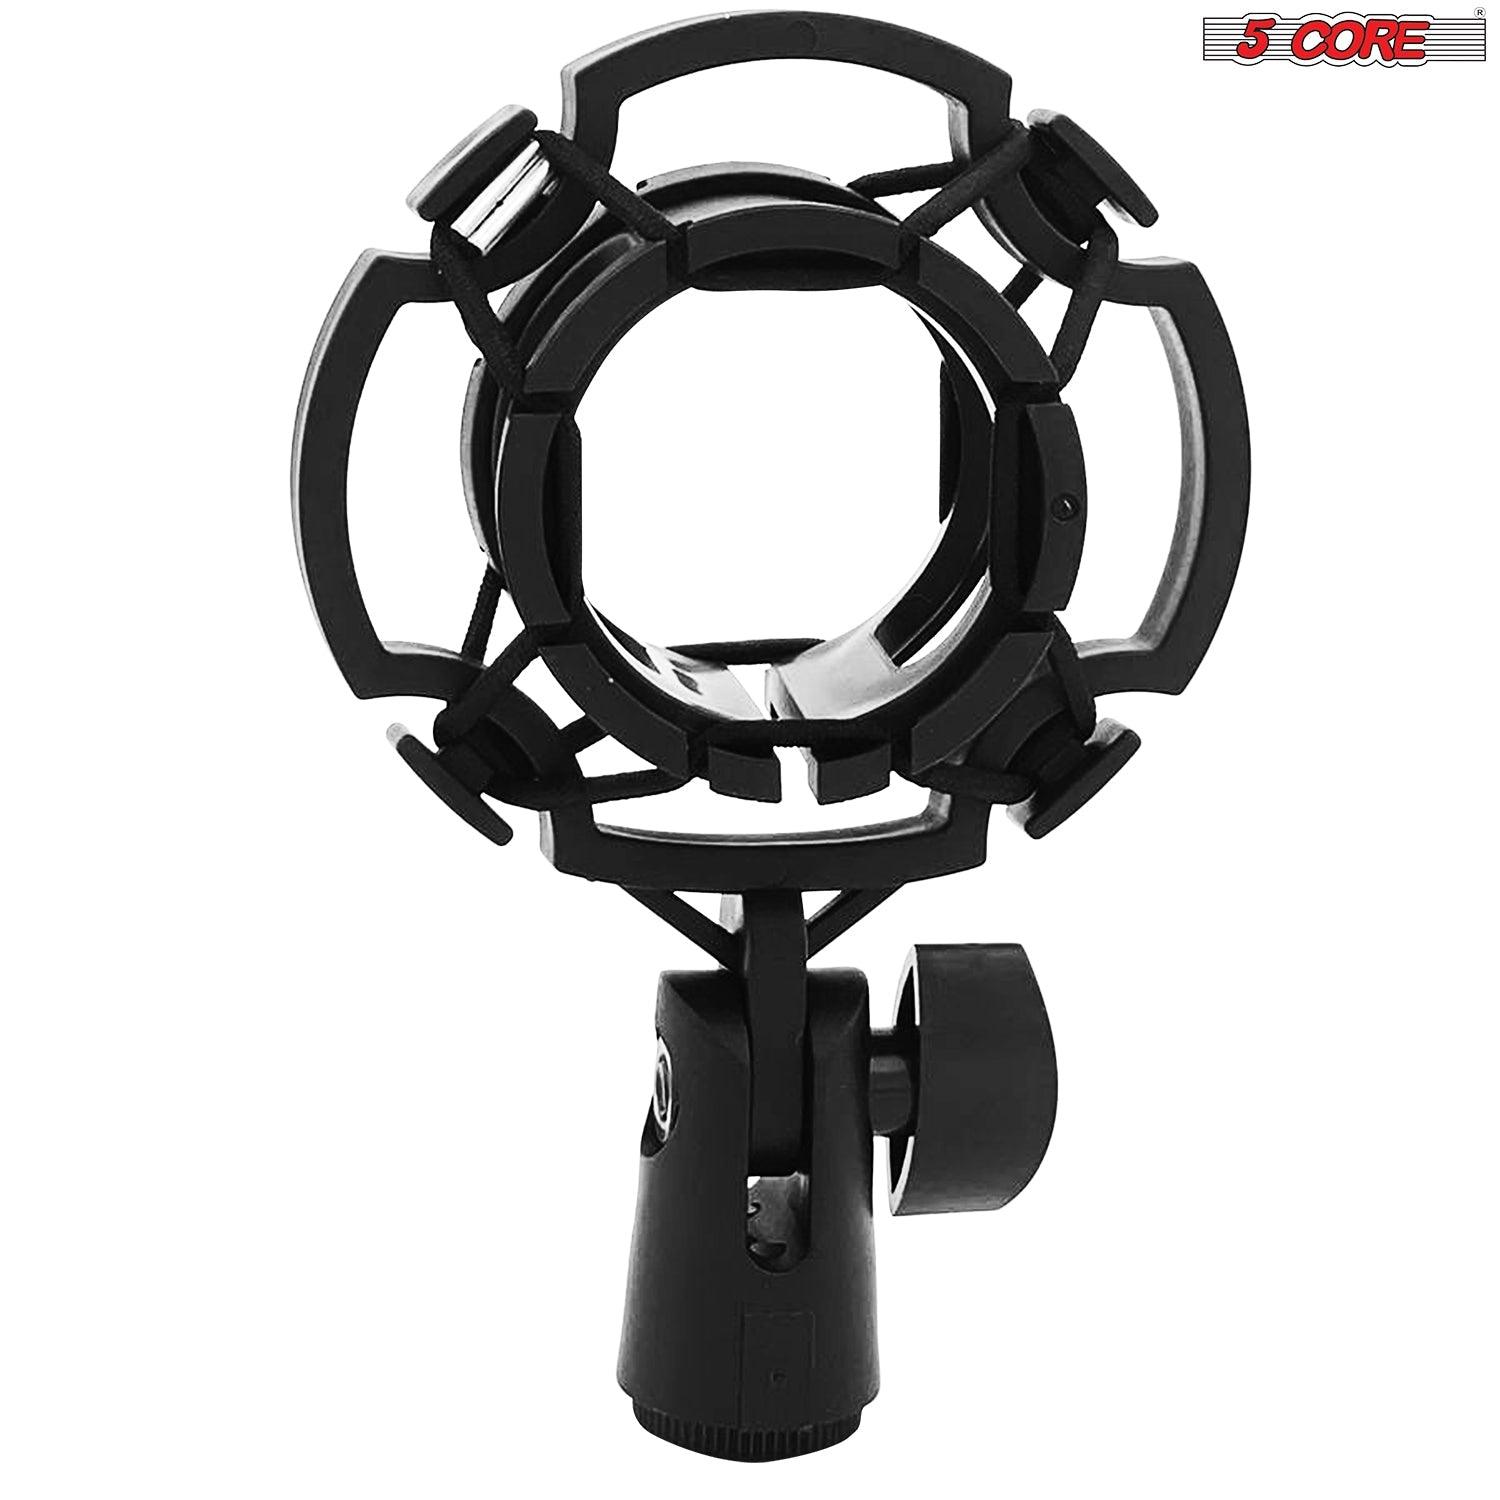 Professional Microphone Stand with Pop Filter Heavy Duty Suspension - VirtuousWares:Global